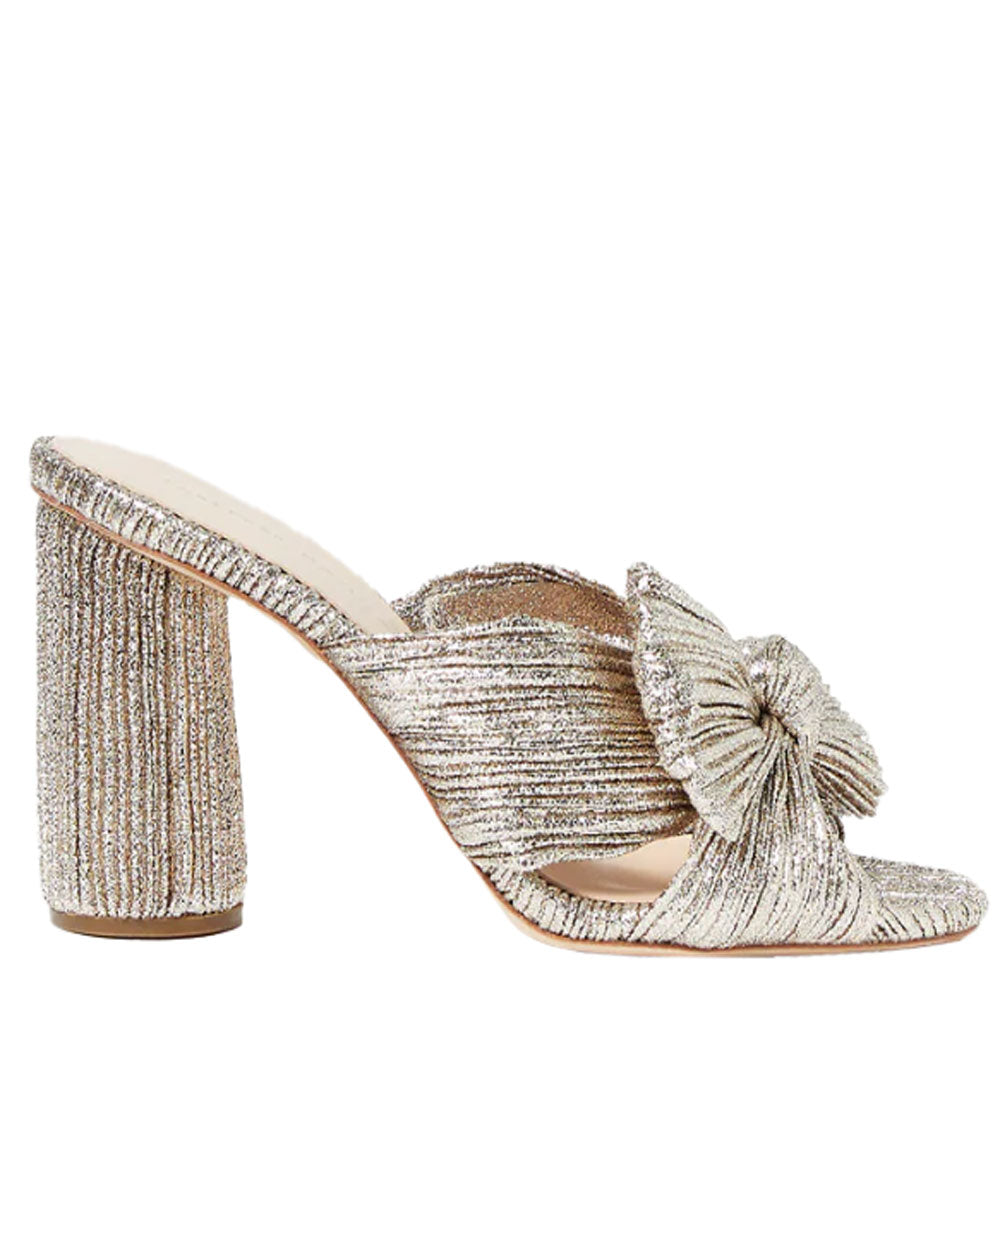 Penny Knotted Mule in Champagne